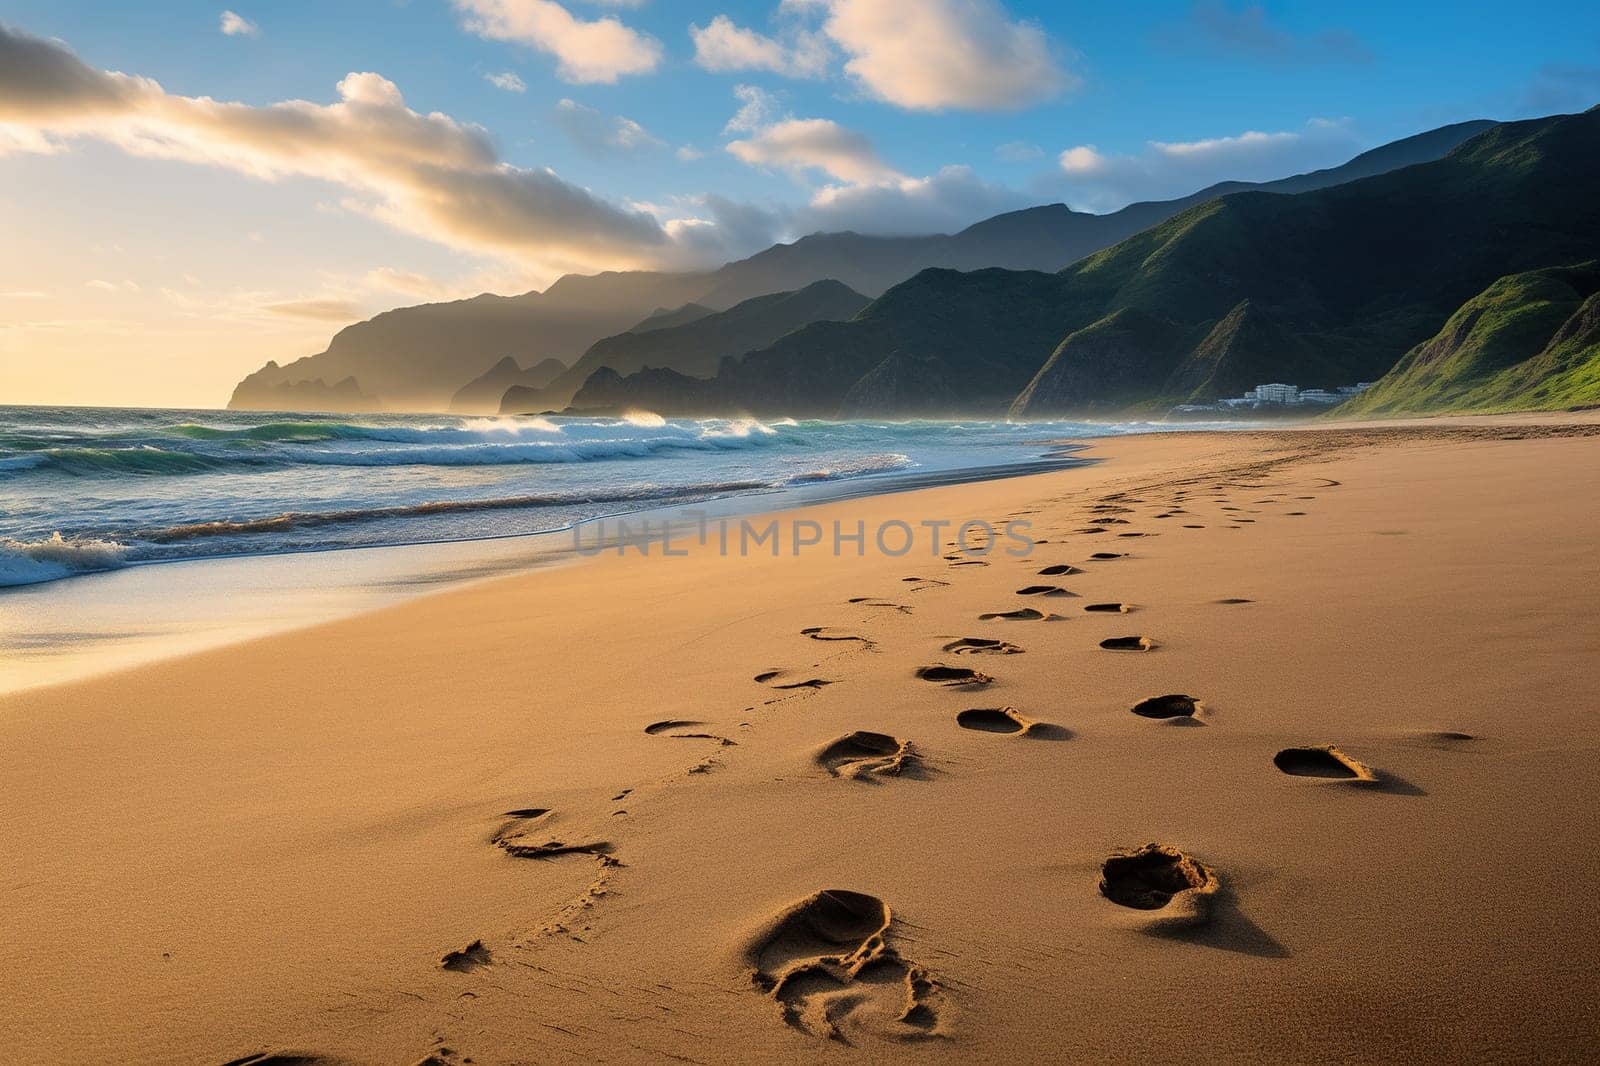 Footprints in the sand along the seashore near the mountains. Vacation concept. Generated by artificial intelligence by Vovmar